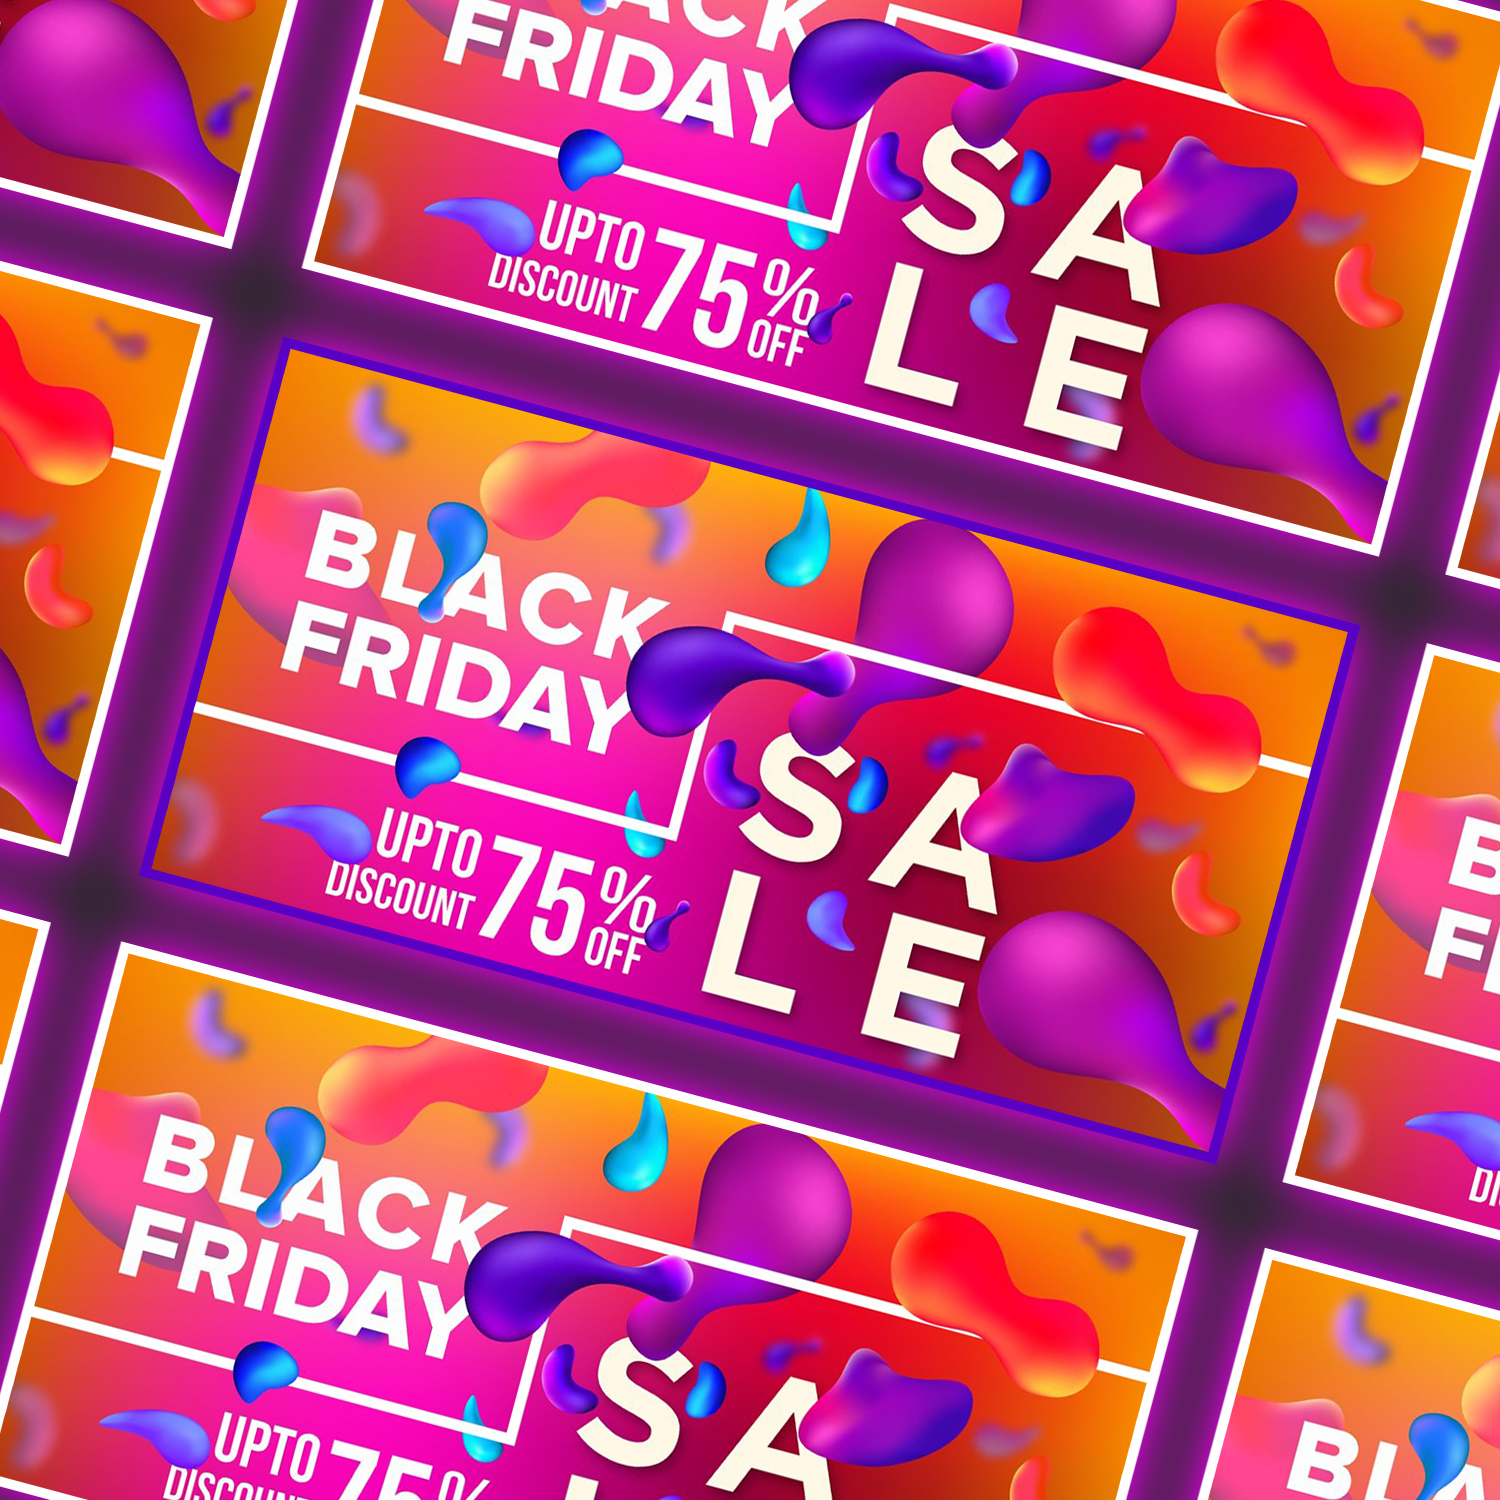 Images with black friday sale banner.